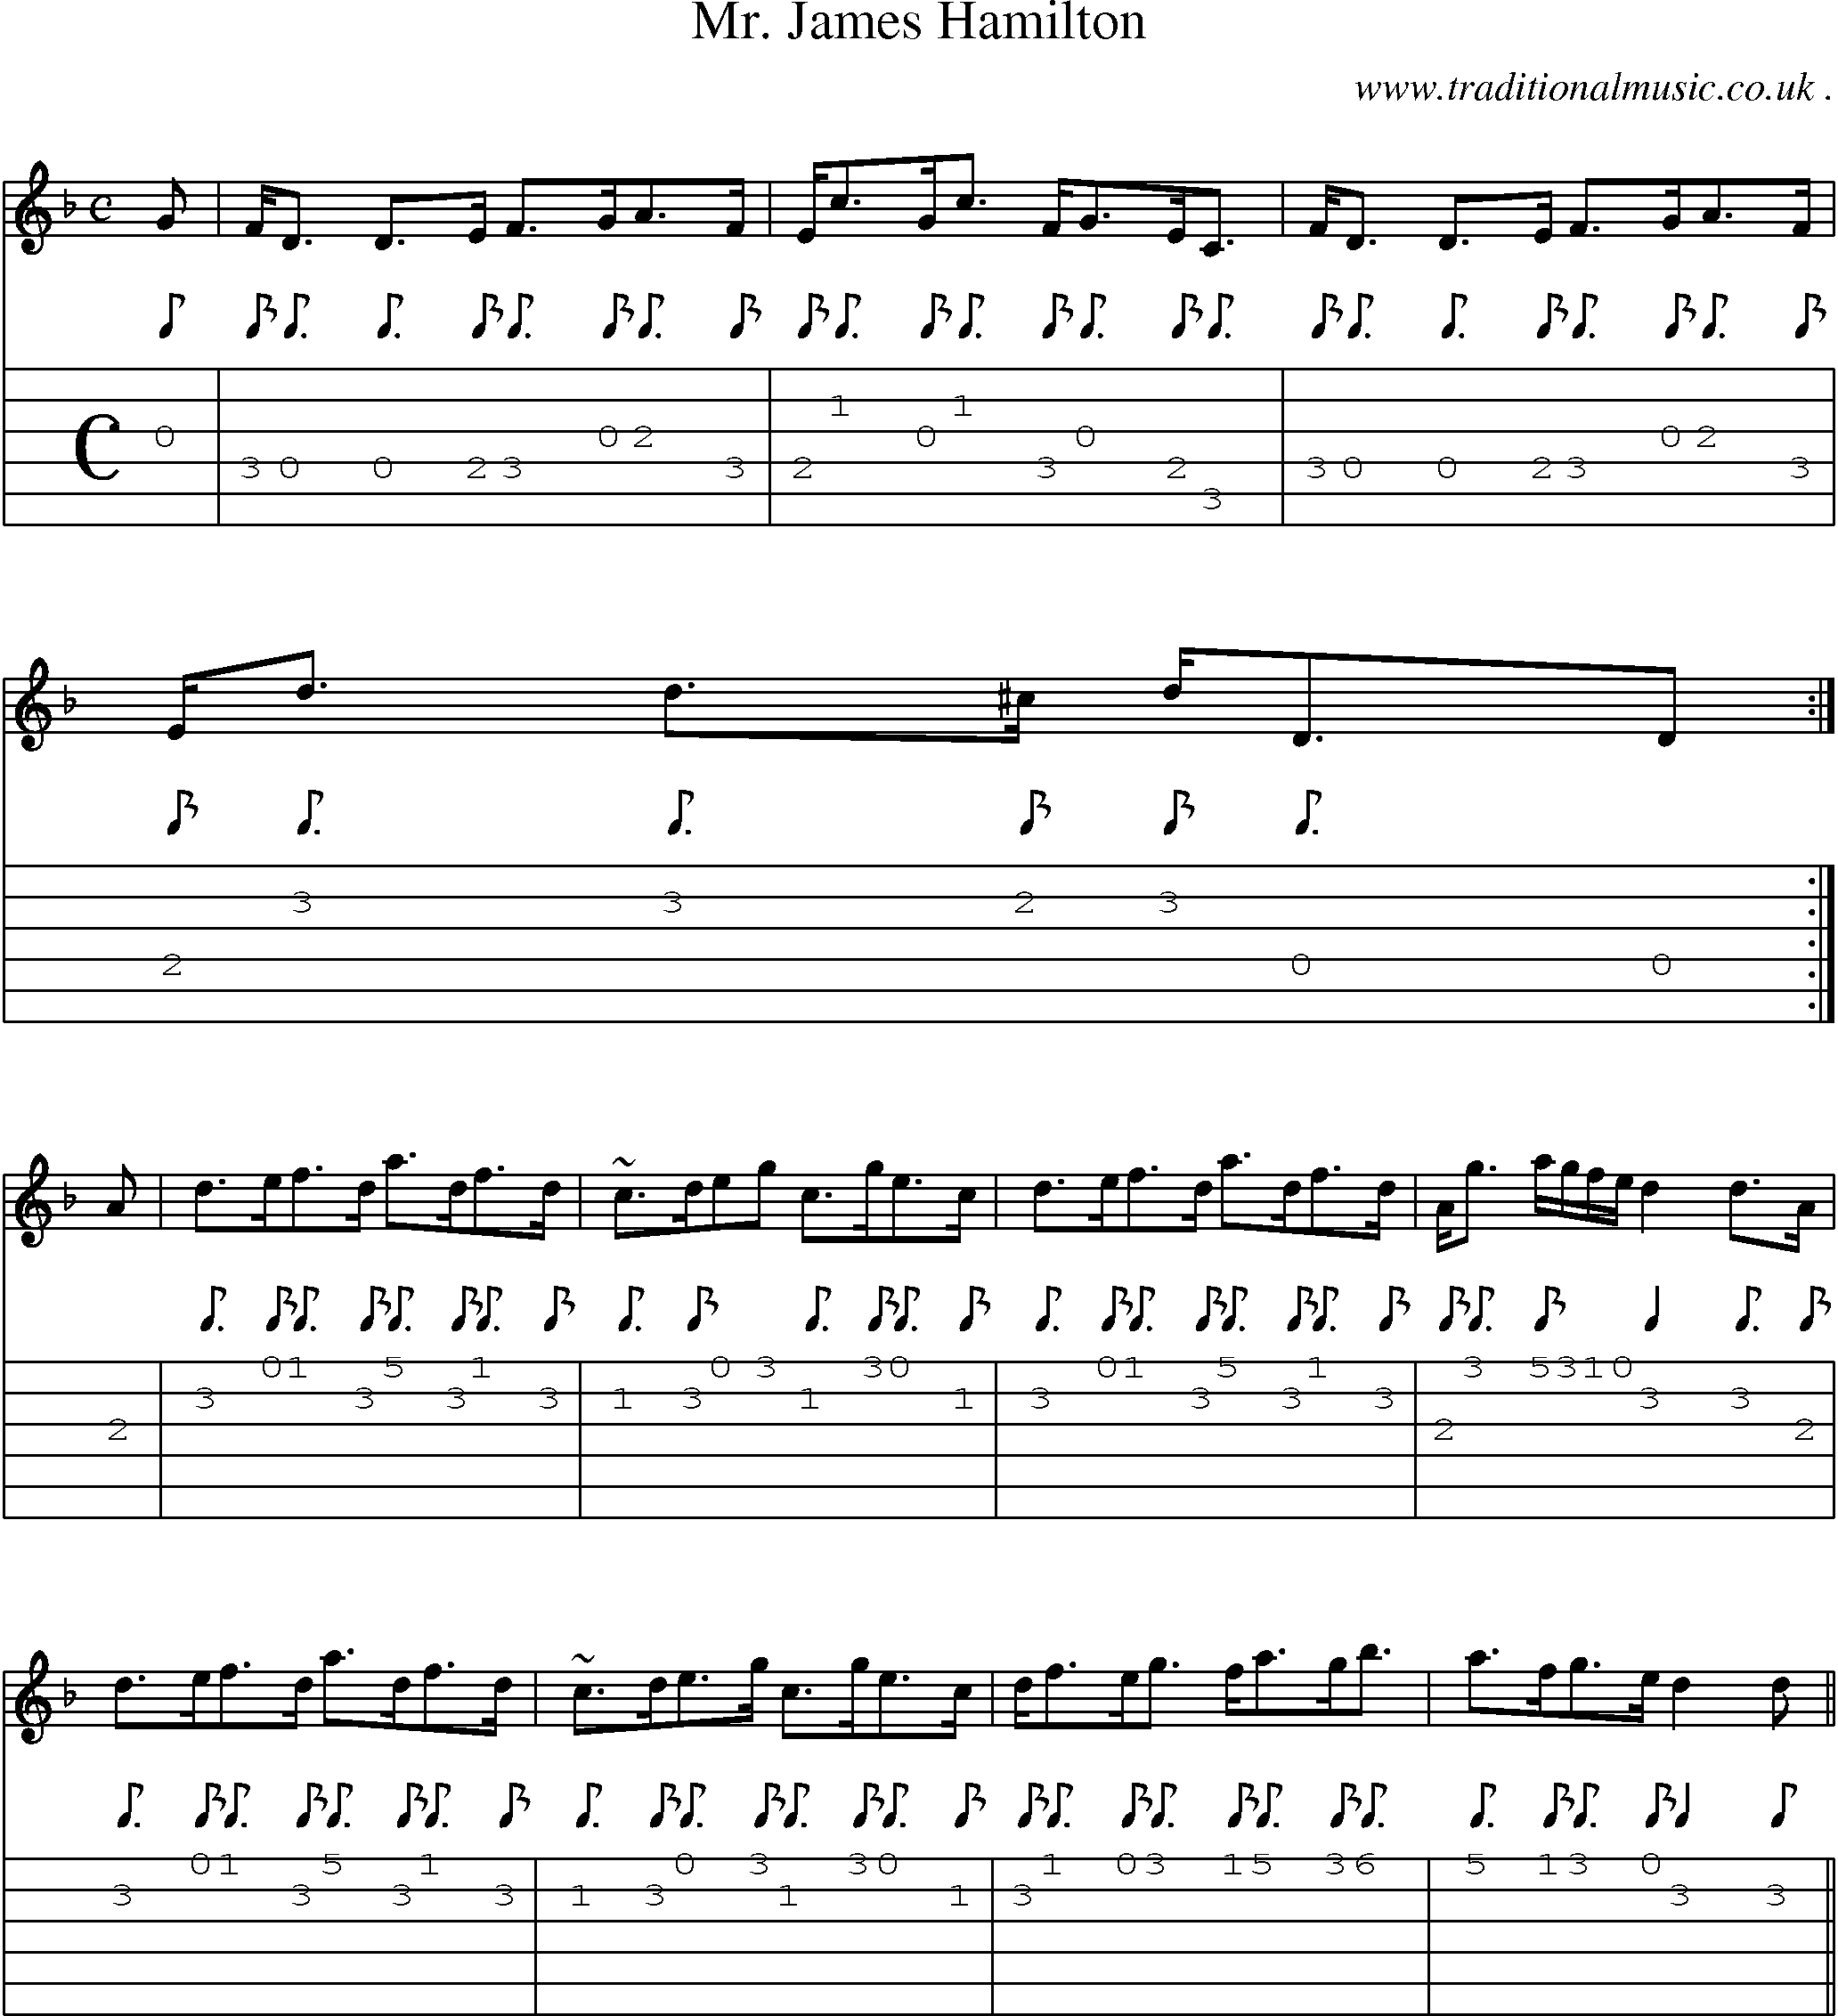 Sheet-music  score, Chords and Guitar Tabs for Mr James Hamilton